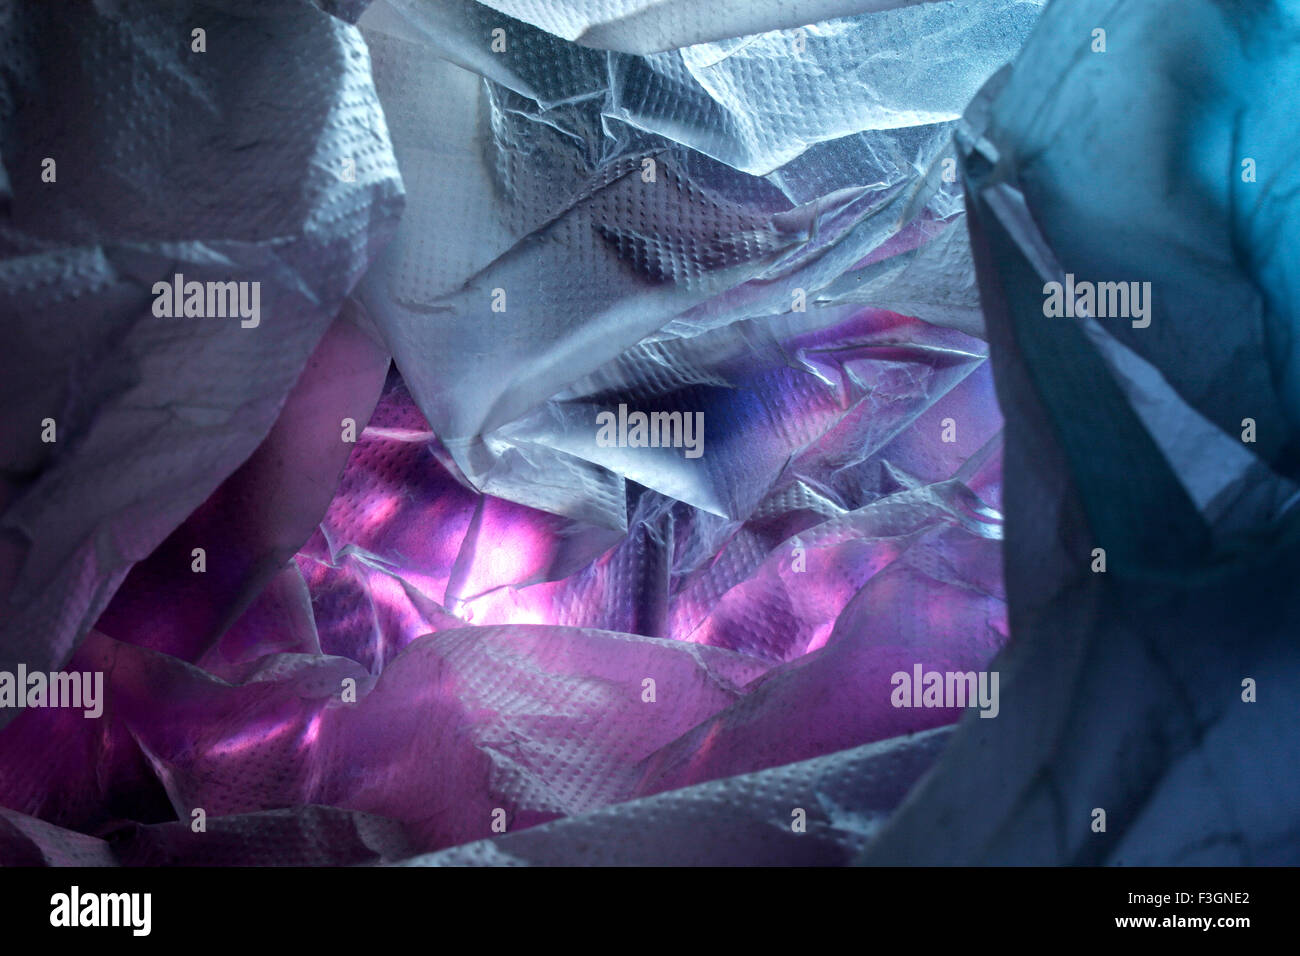 Abstract of plastic shopping bag on pink gift wrapping paper in blue and red light ; Pune ; Maharashtra ; India Stock Photo